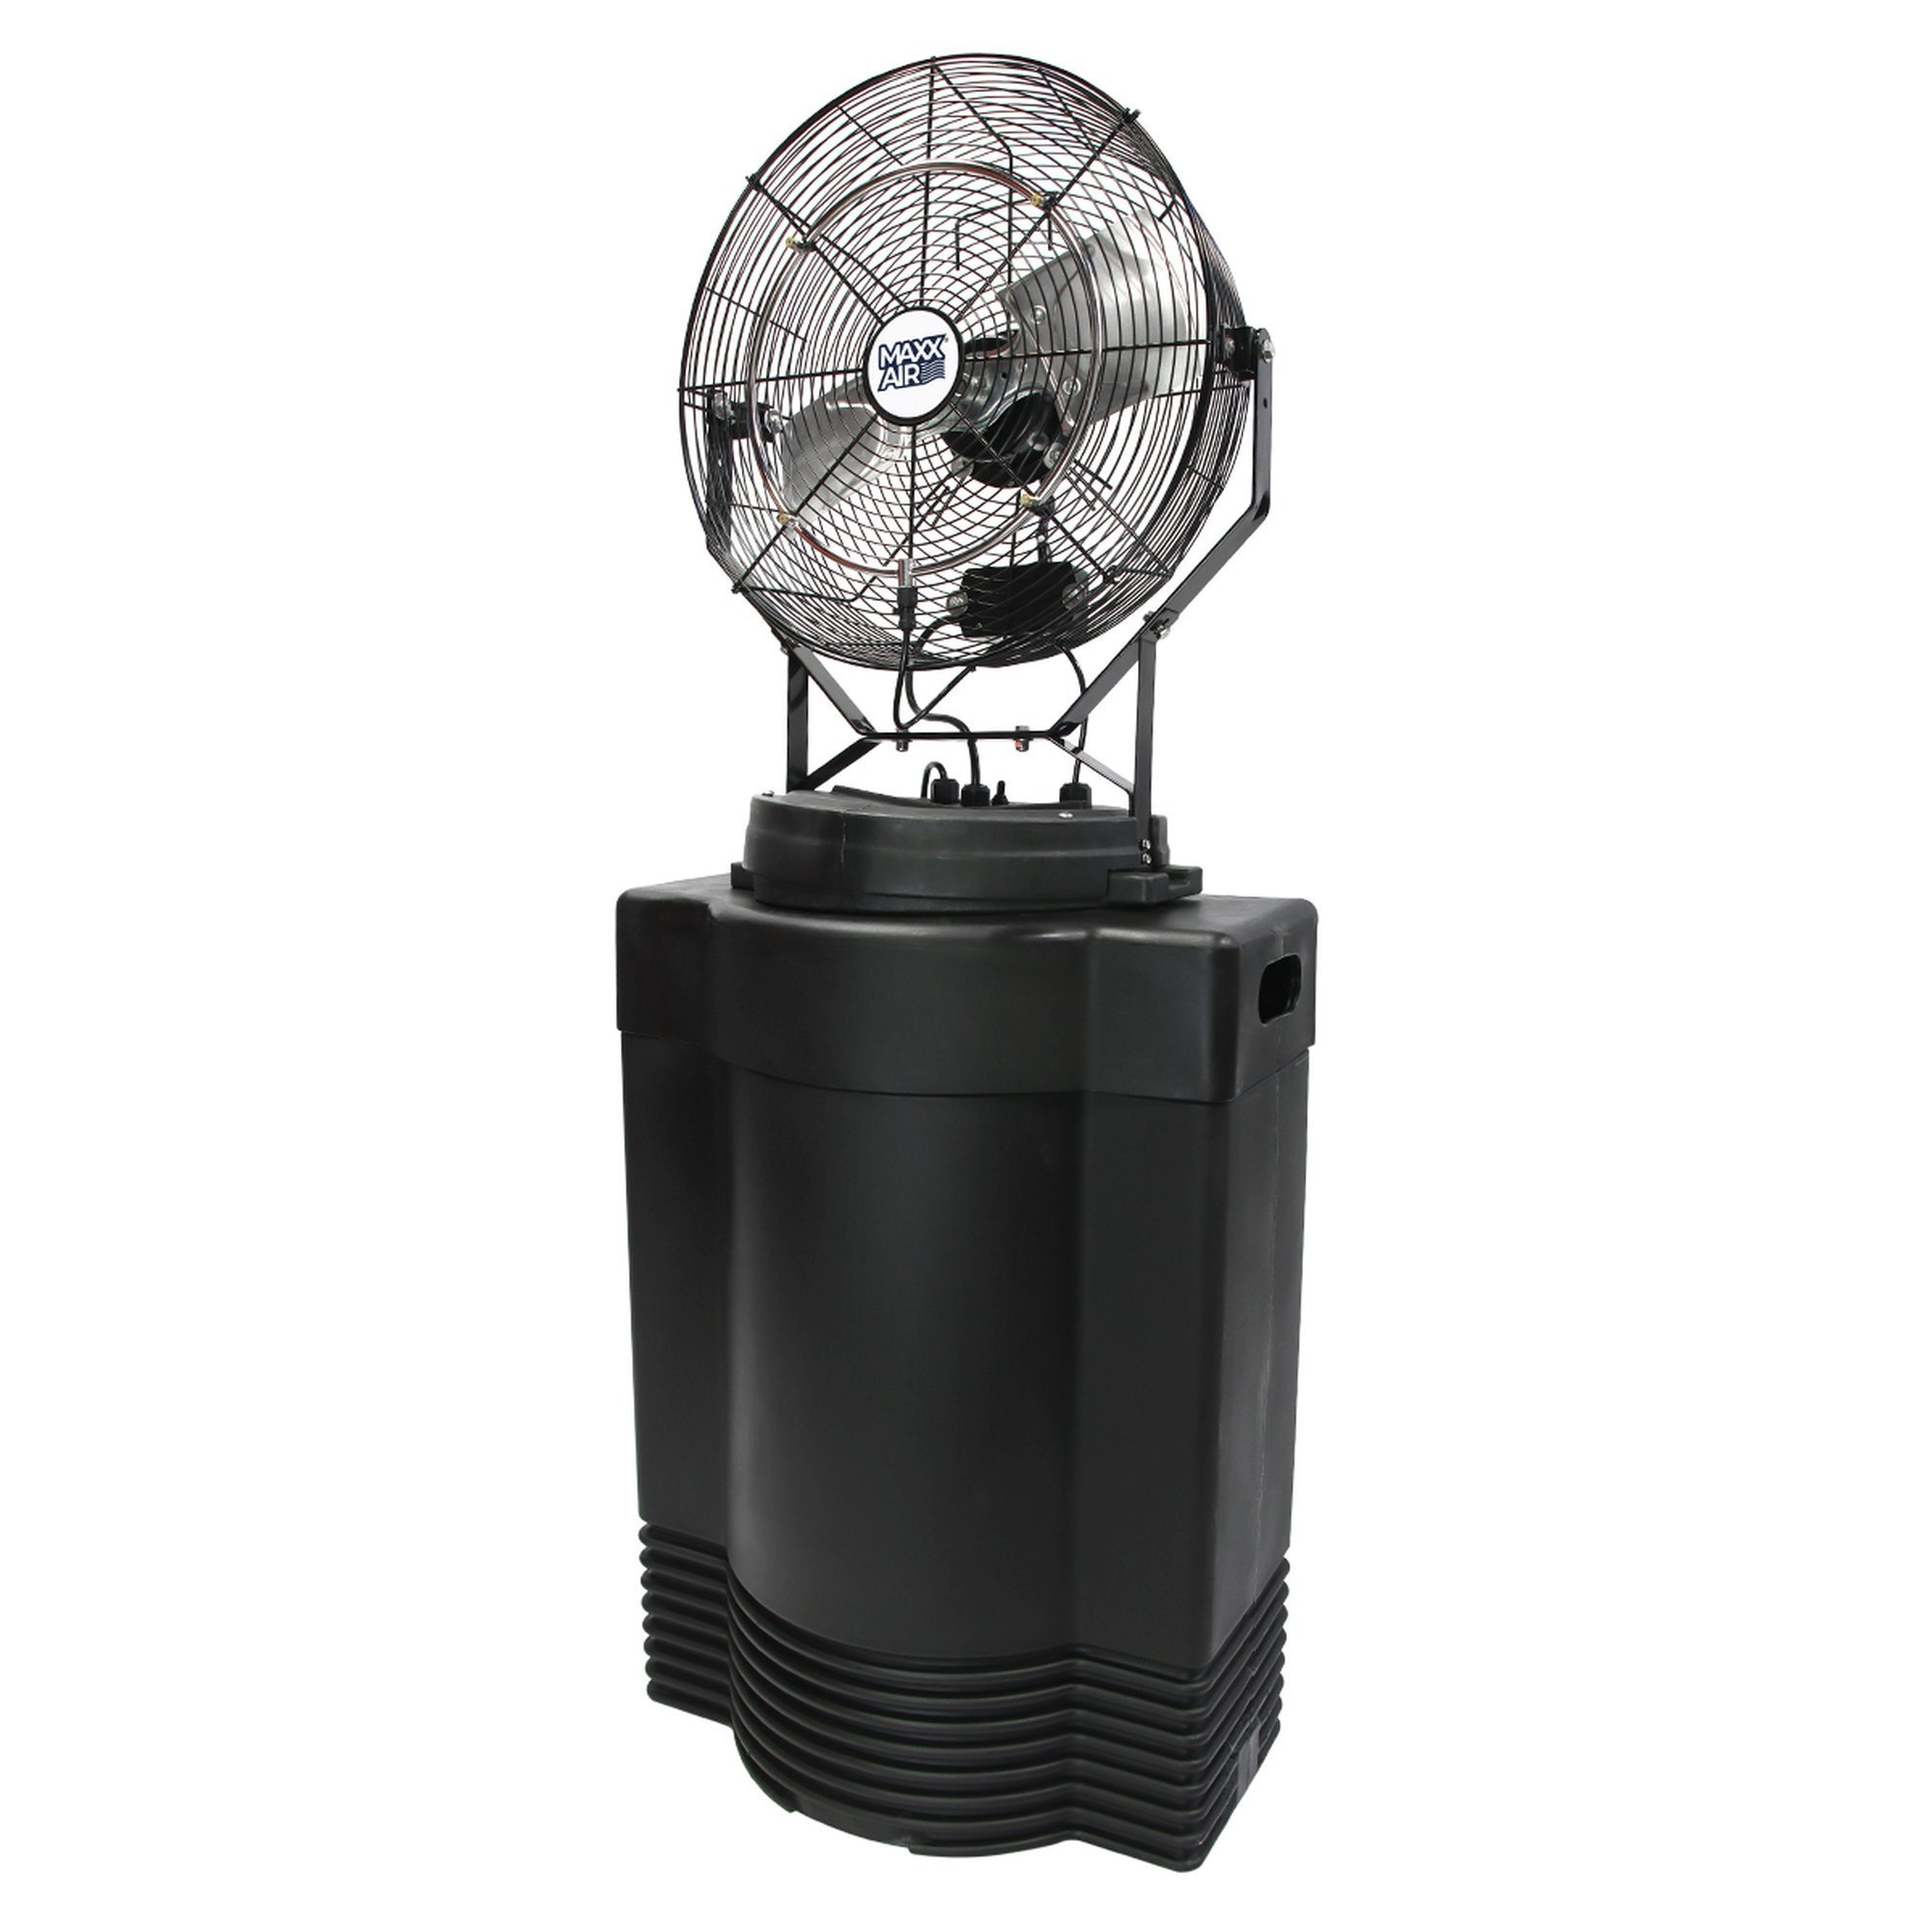 MaxxAir, 18Inch 3-Speed Misting Fan with 40 Gal. Tank, Fan Diameter 18 in, Air Delivery 3500 cfm, Model CDMP1840GRY